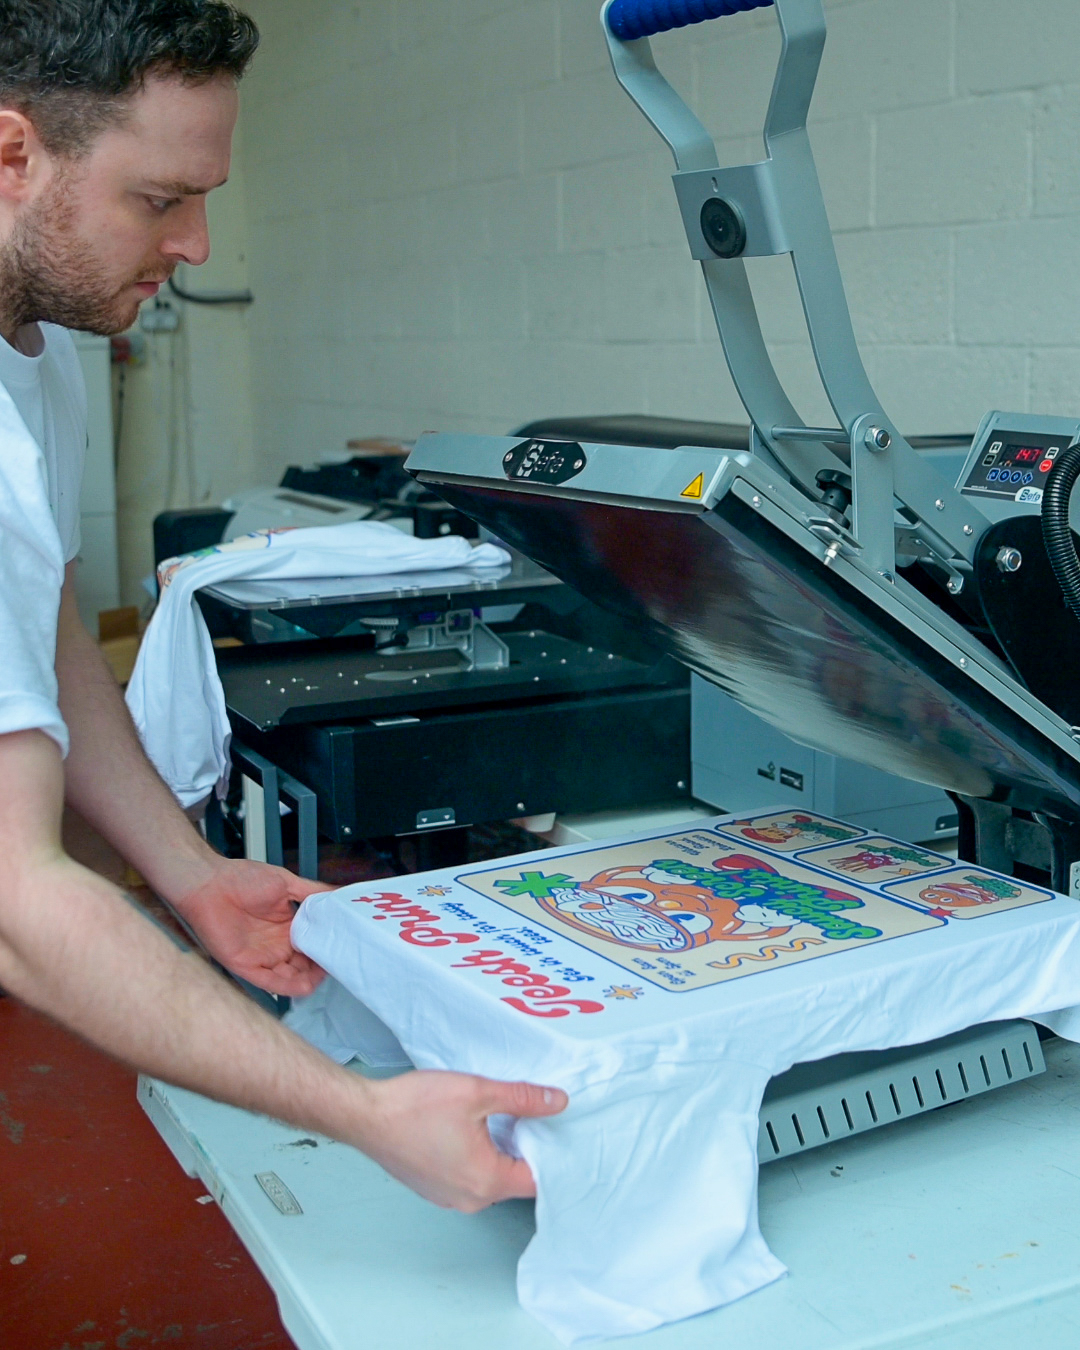 A staff member at teesh print ltd taking off a freshly printed t-shirt from the heat press after dtg printing